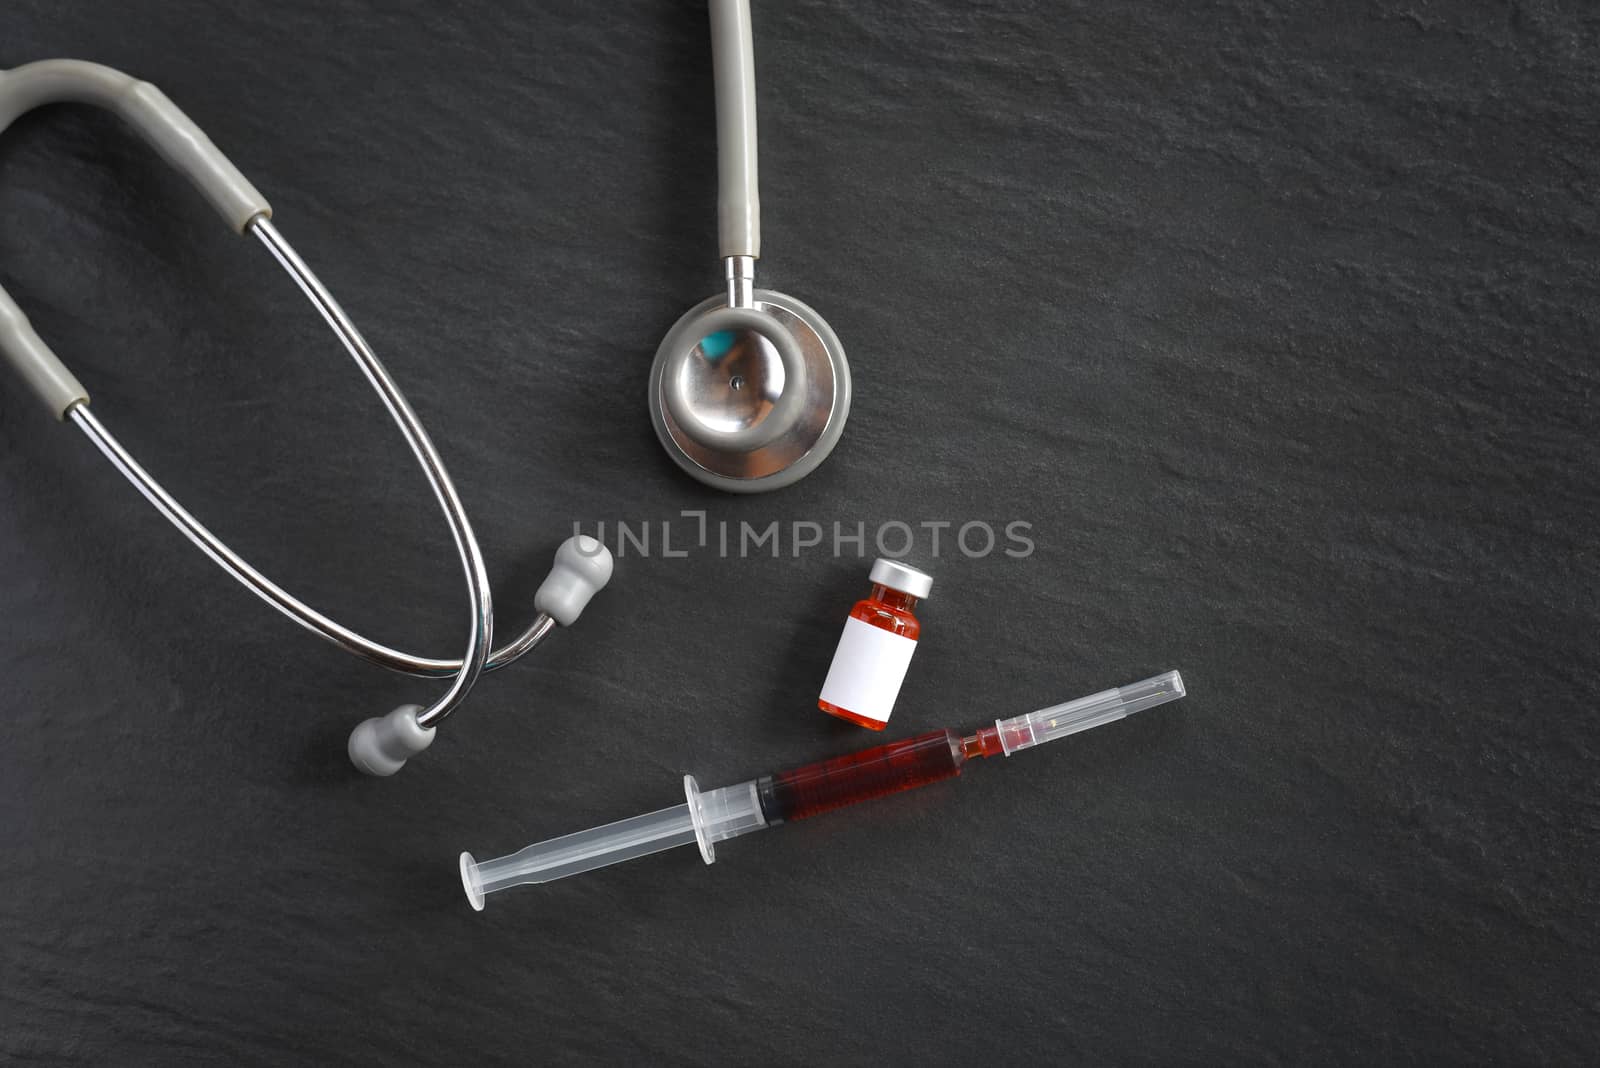 stethoscope and Vaccine and syringe injection on black background. Covid-19 or Coronavirus Concept for prevention,immunization and treatment from corona virus infection. Medicine infectious concept.